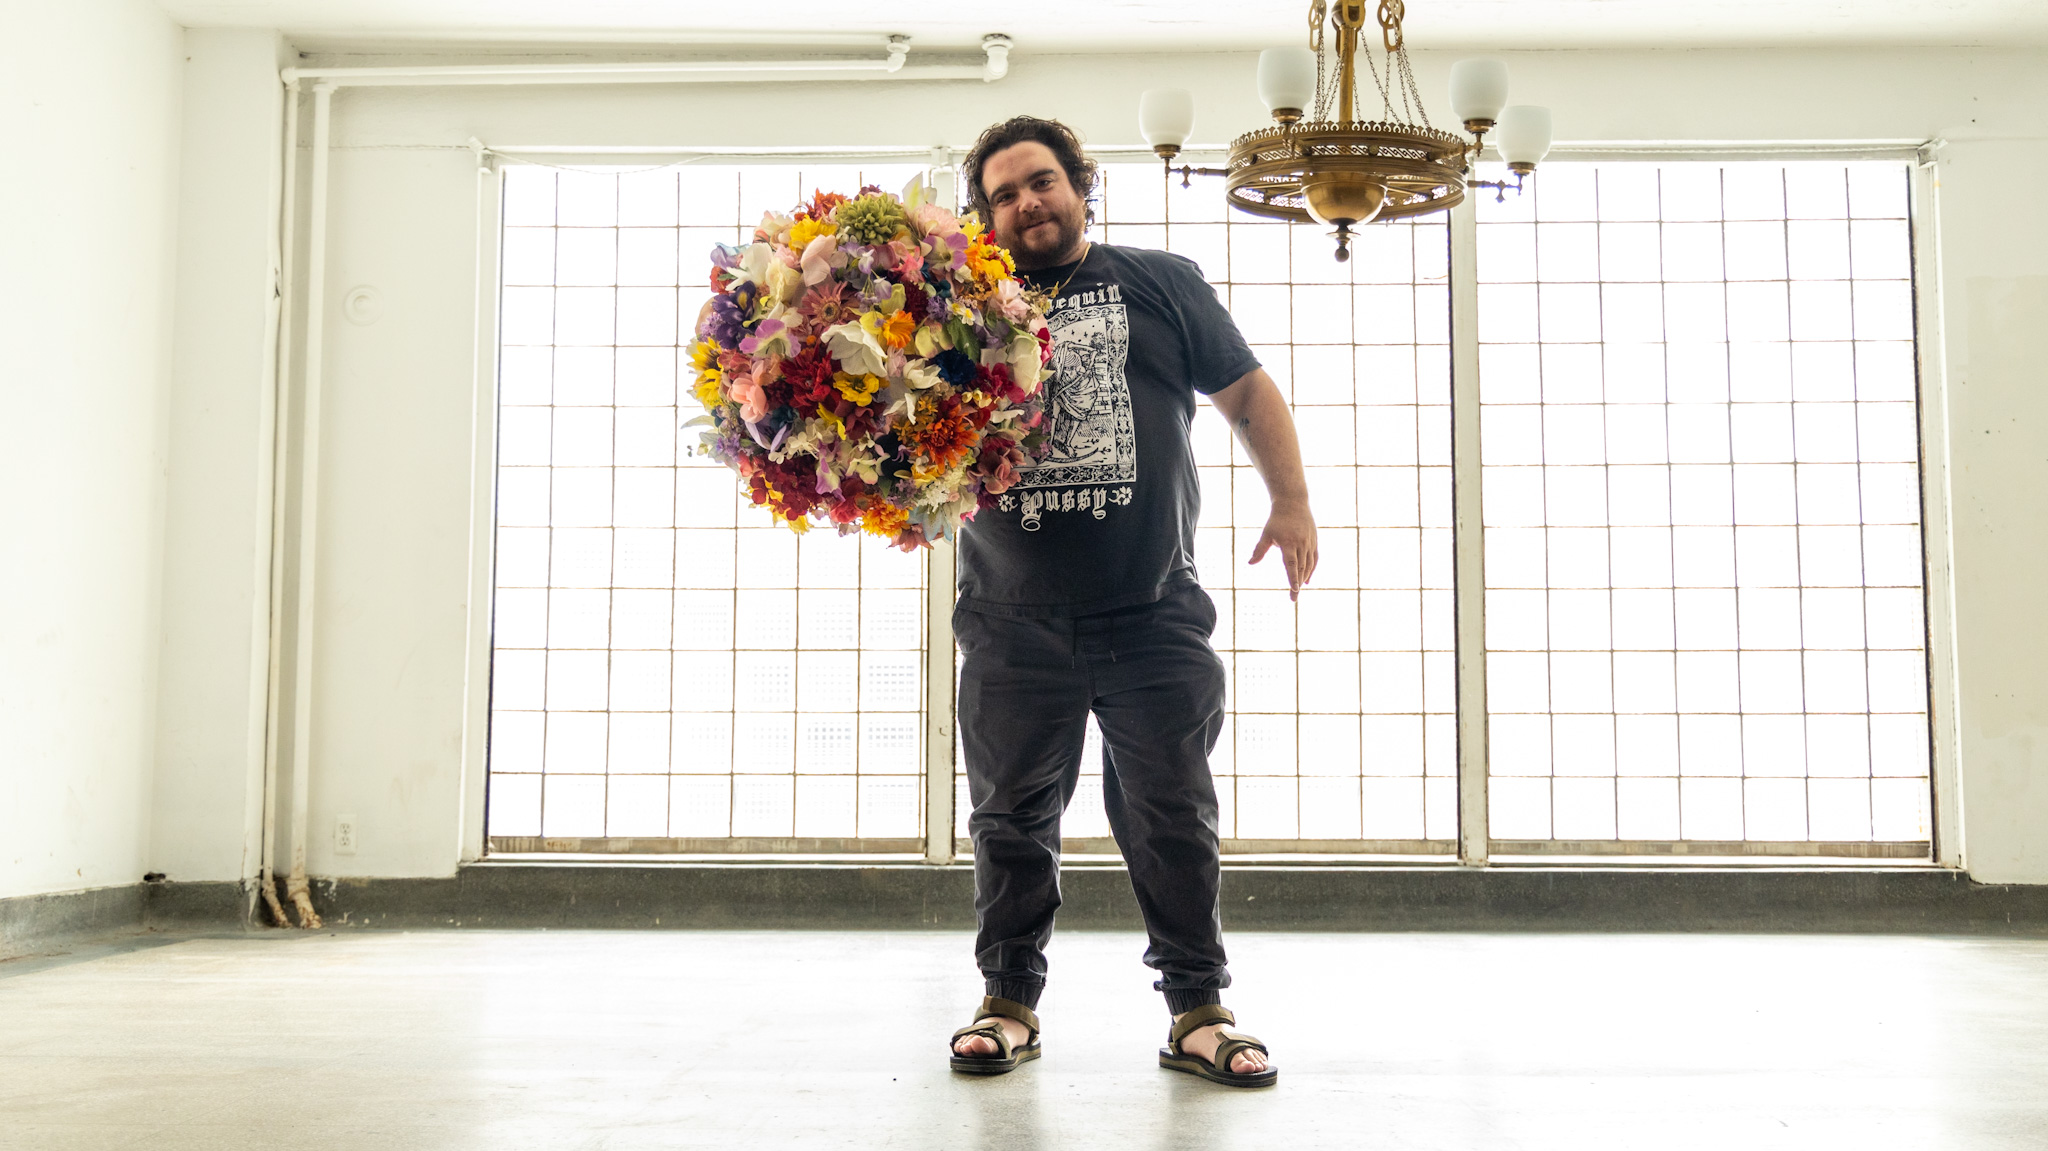 WDET host Ryan Patrick Hooper holding a flower headdress created by artist Lisa Waud at her "Portrait" art installation at the Boyer Campbell building in Detroit on June 26, 2024.